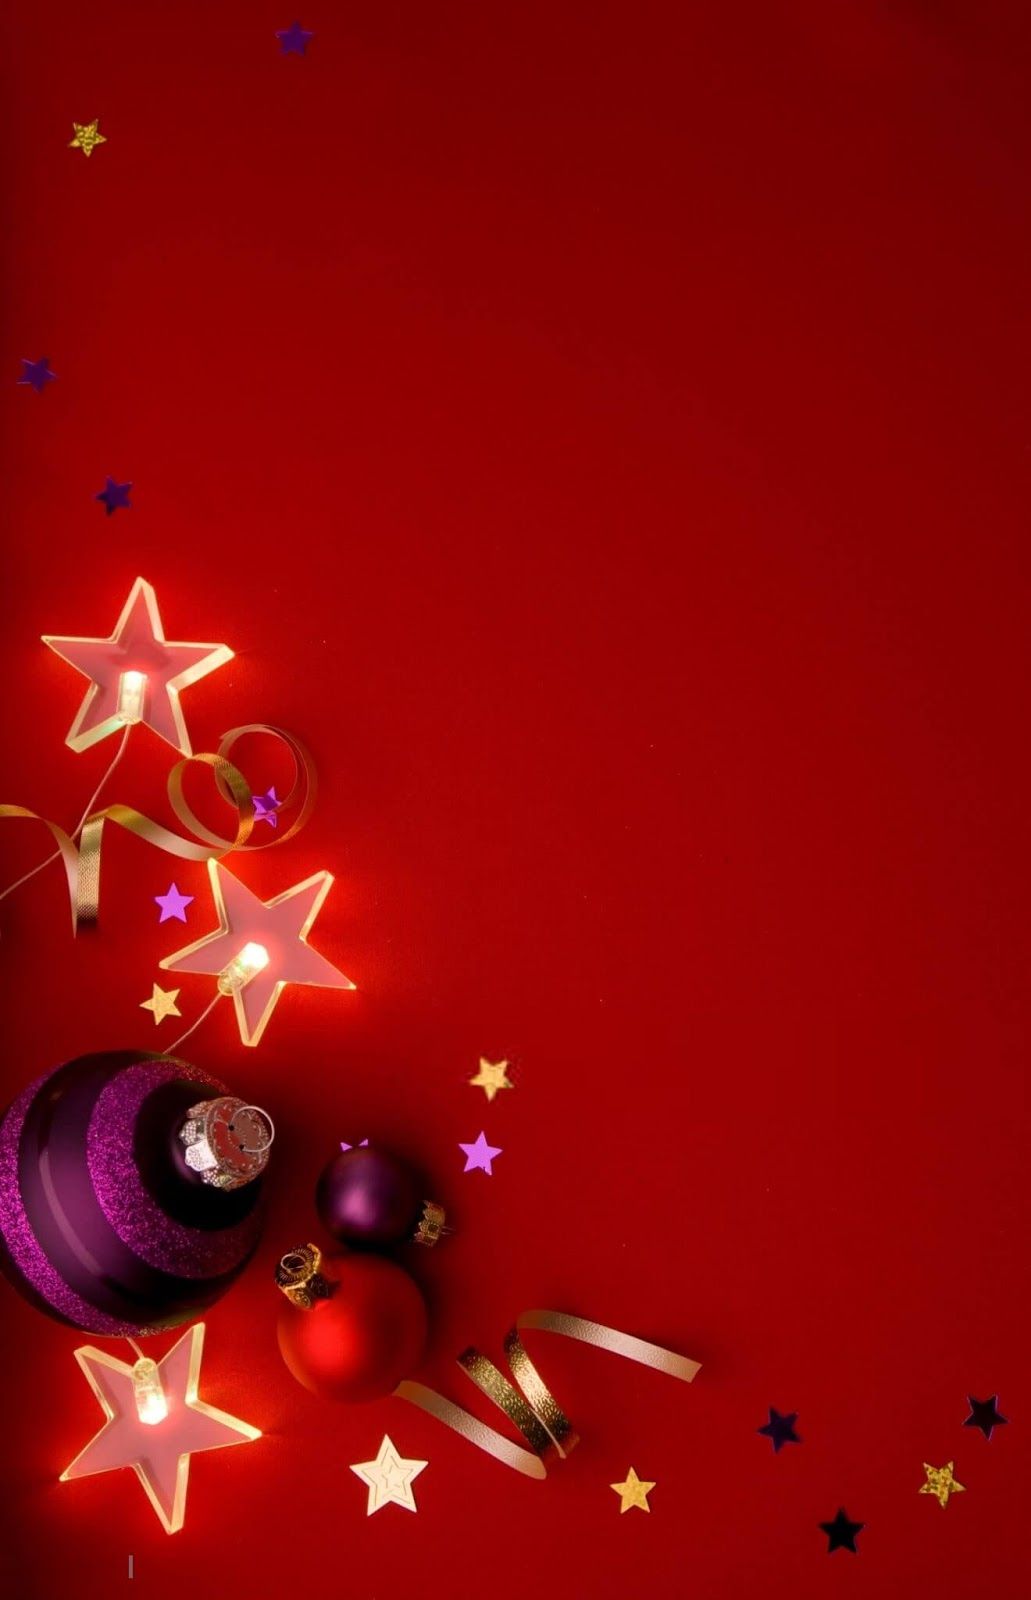 Christmas Background Image Pictures With